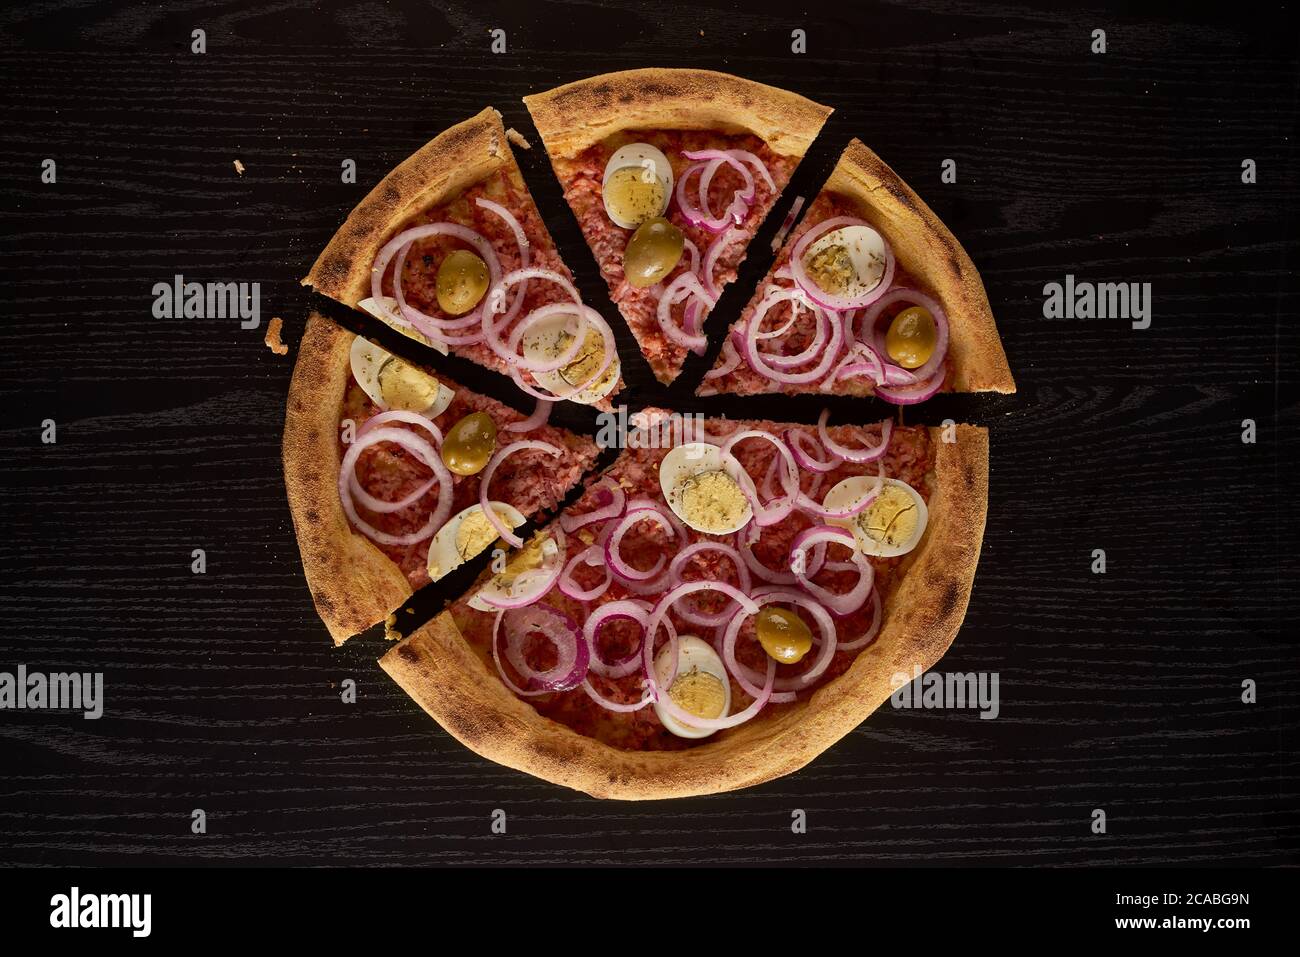 onion, eggs pizza on black background sliced and isolated Stock Photo